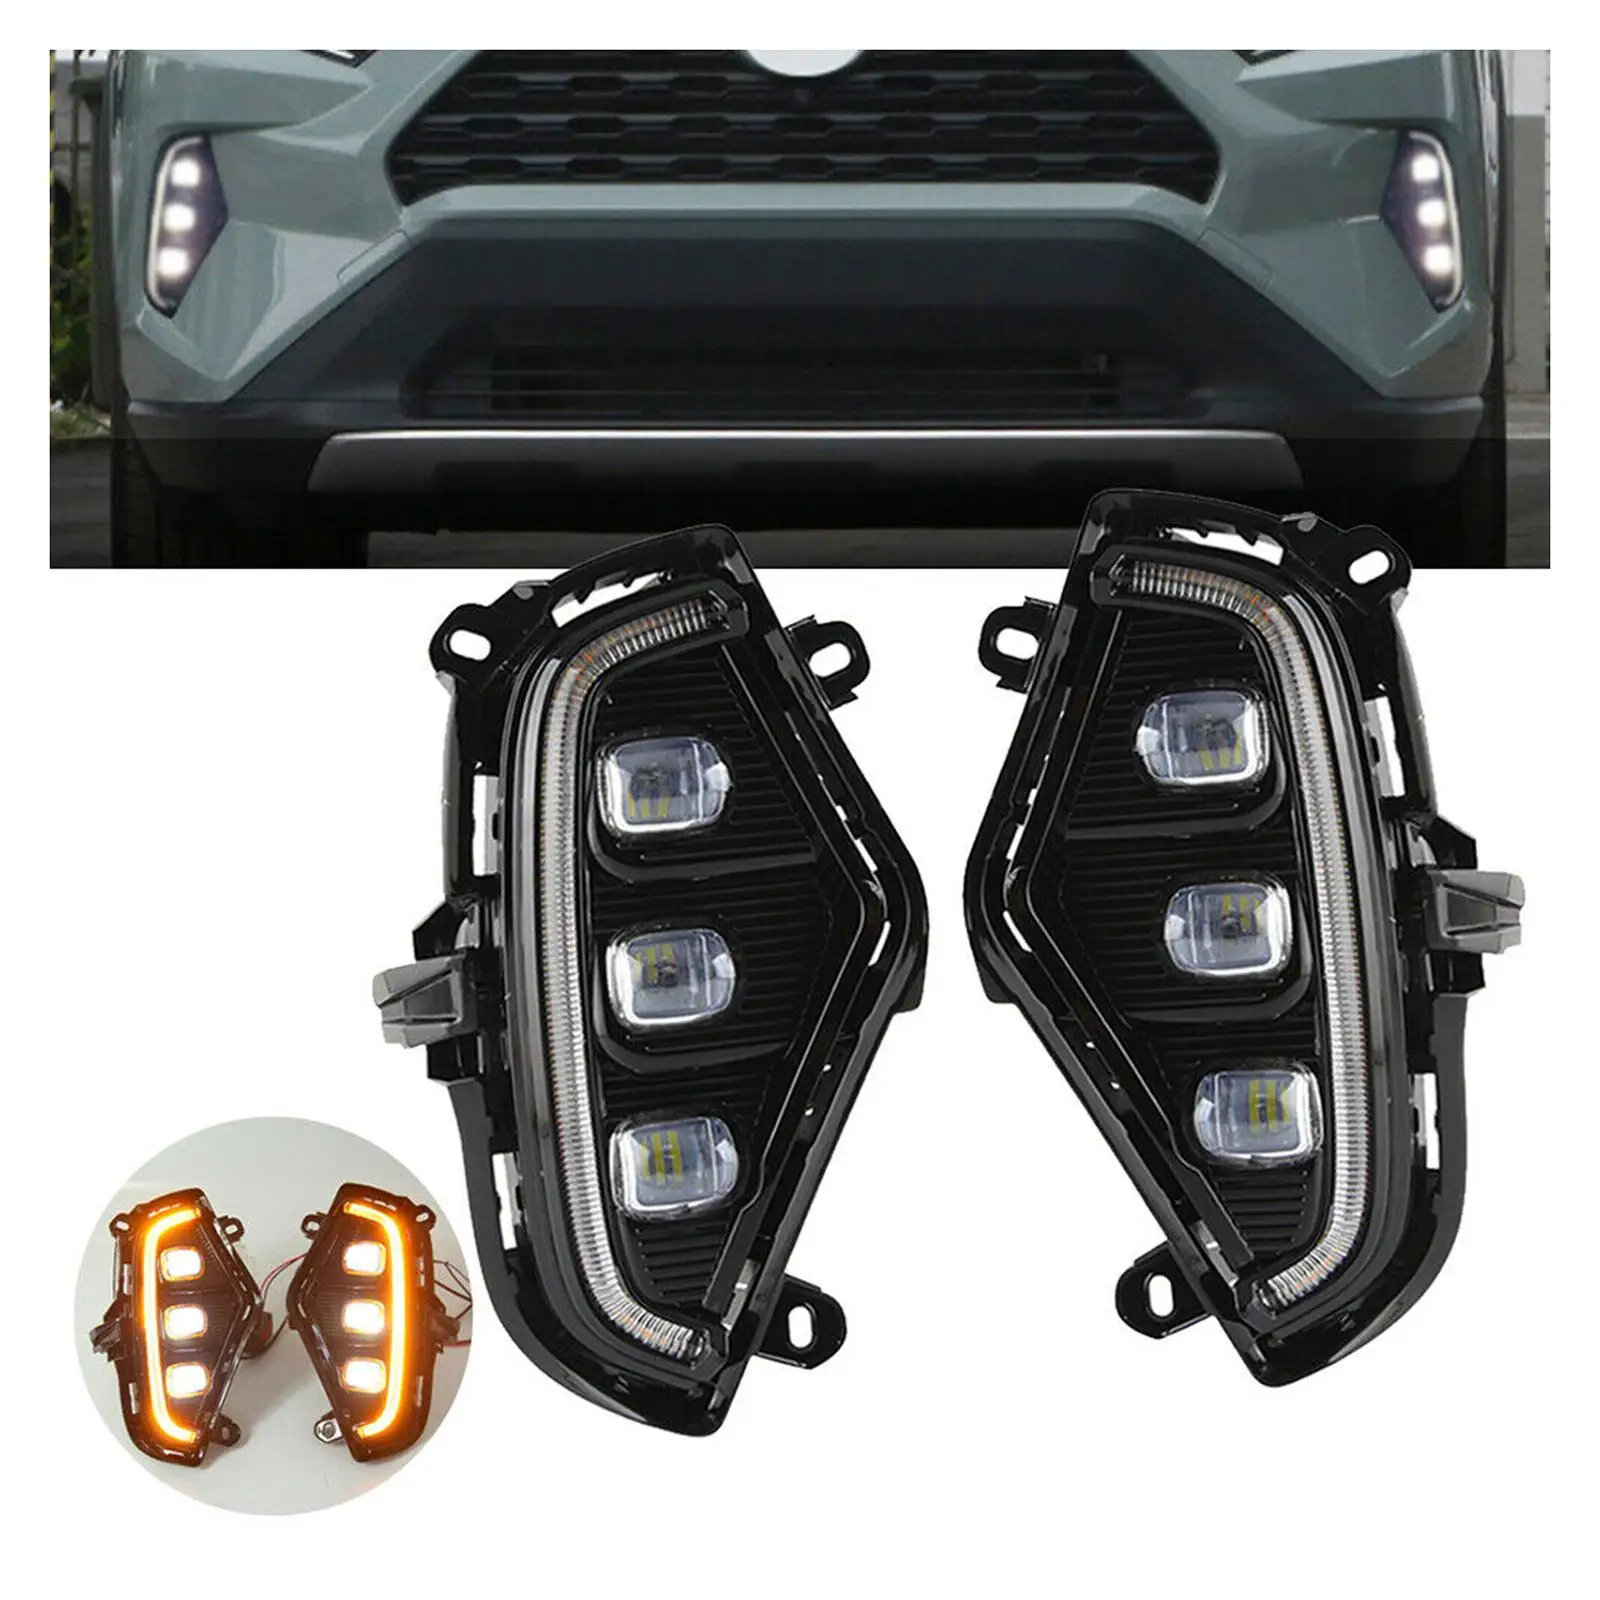 

2Pcs LED Drl Daytime Running Light Assembly Fog Lights W/ Turn Signal Lamps Fit for Spare Parts Easy to Install ACC